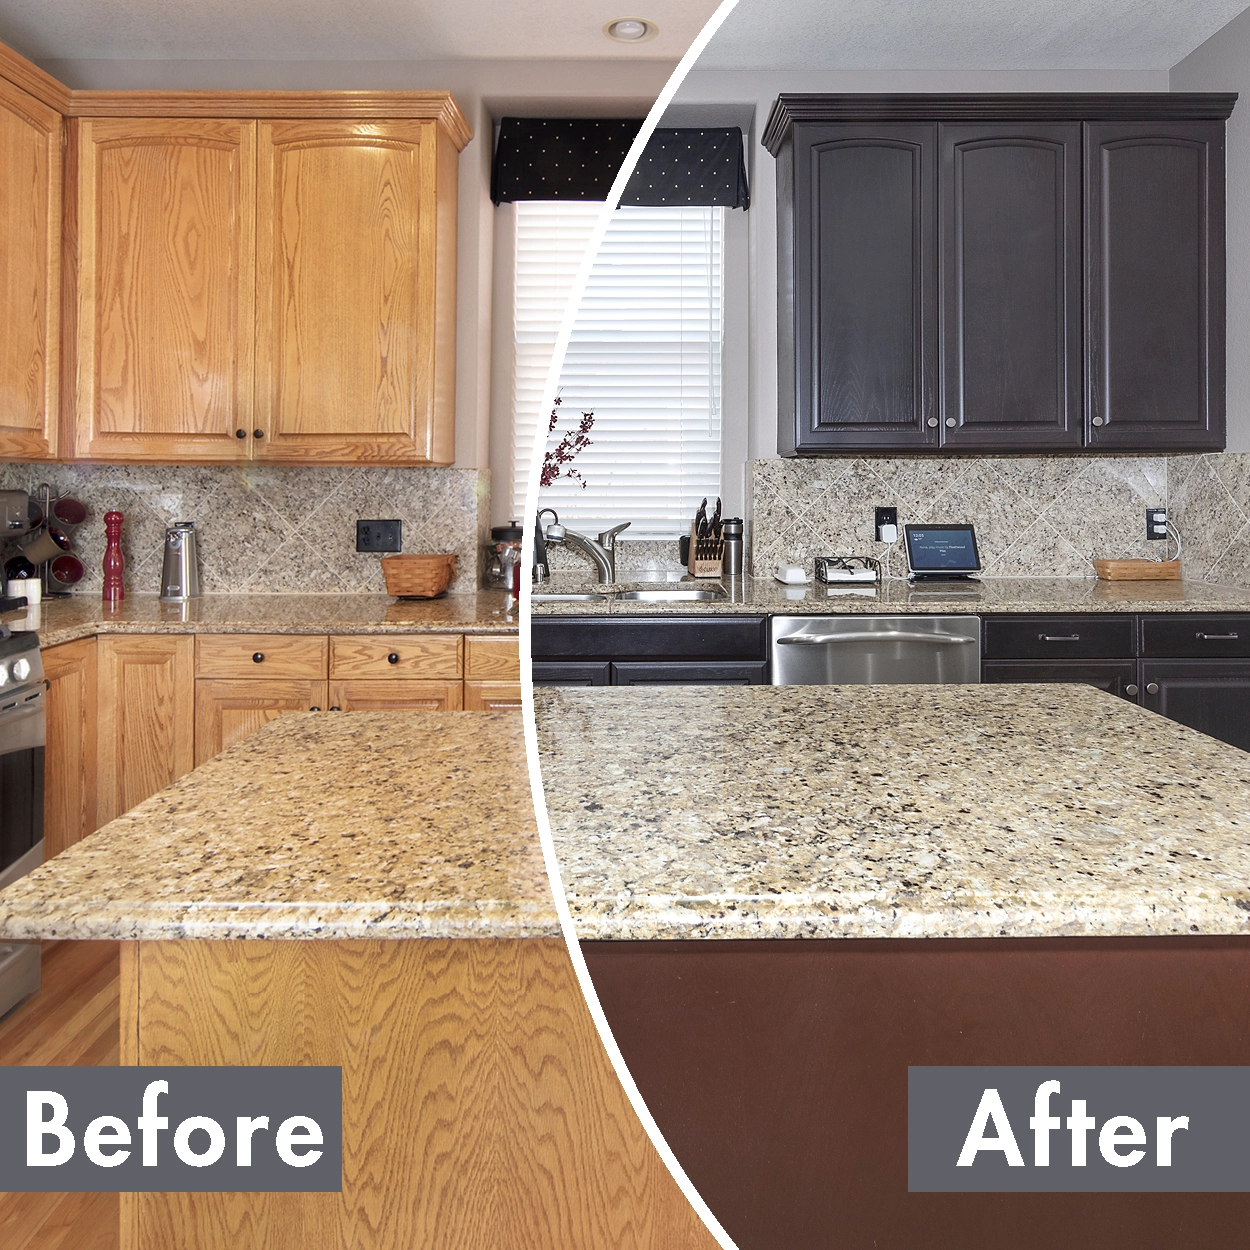 Cabinet Color Change N Hance, How To Change Your Kitchen Cabinets